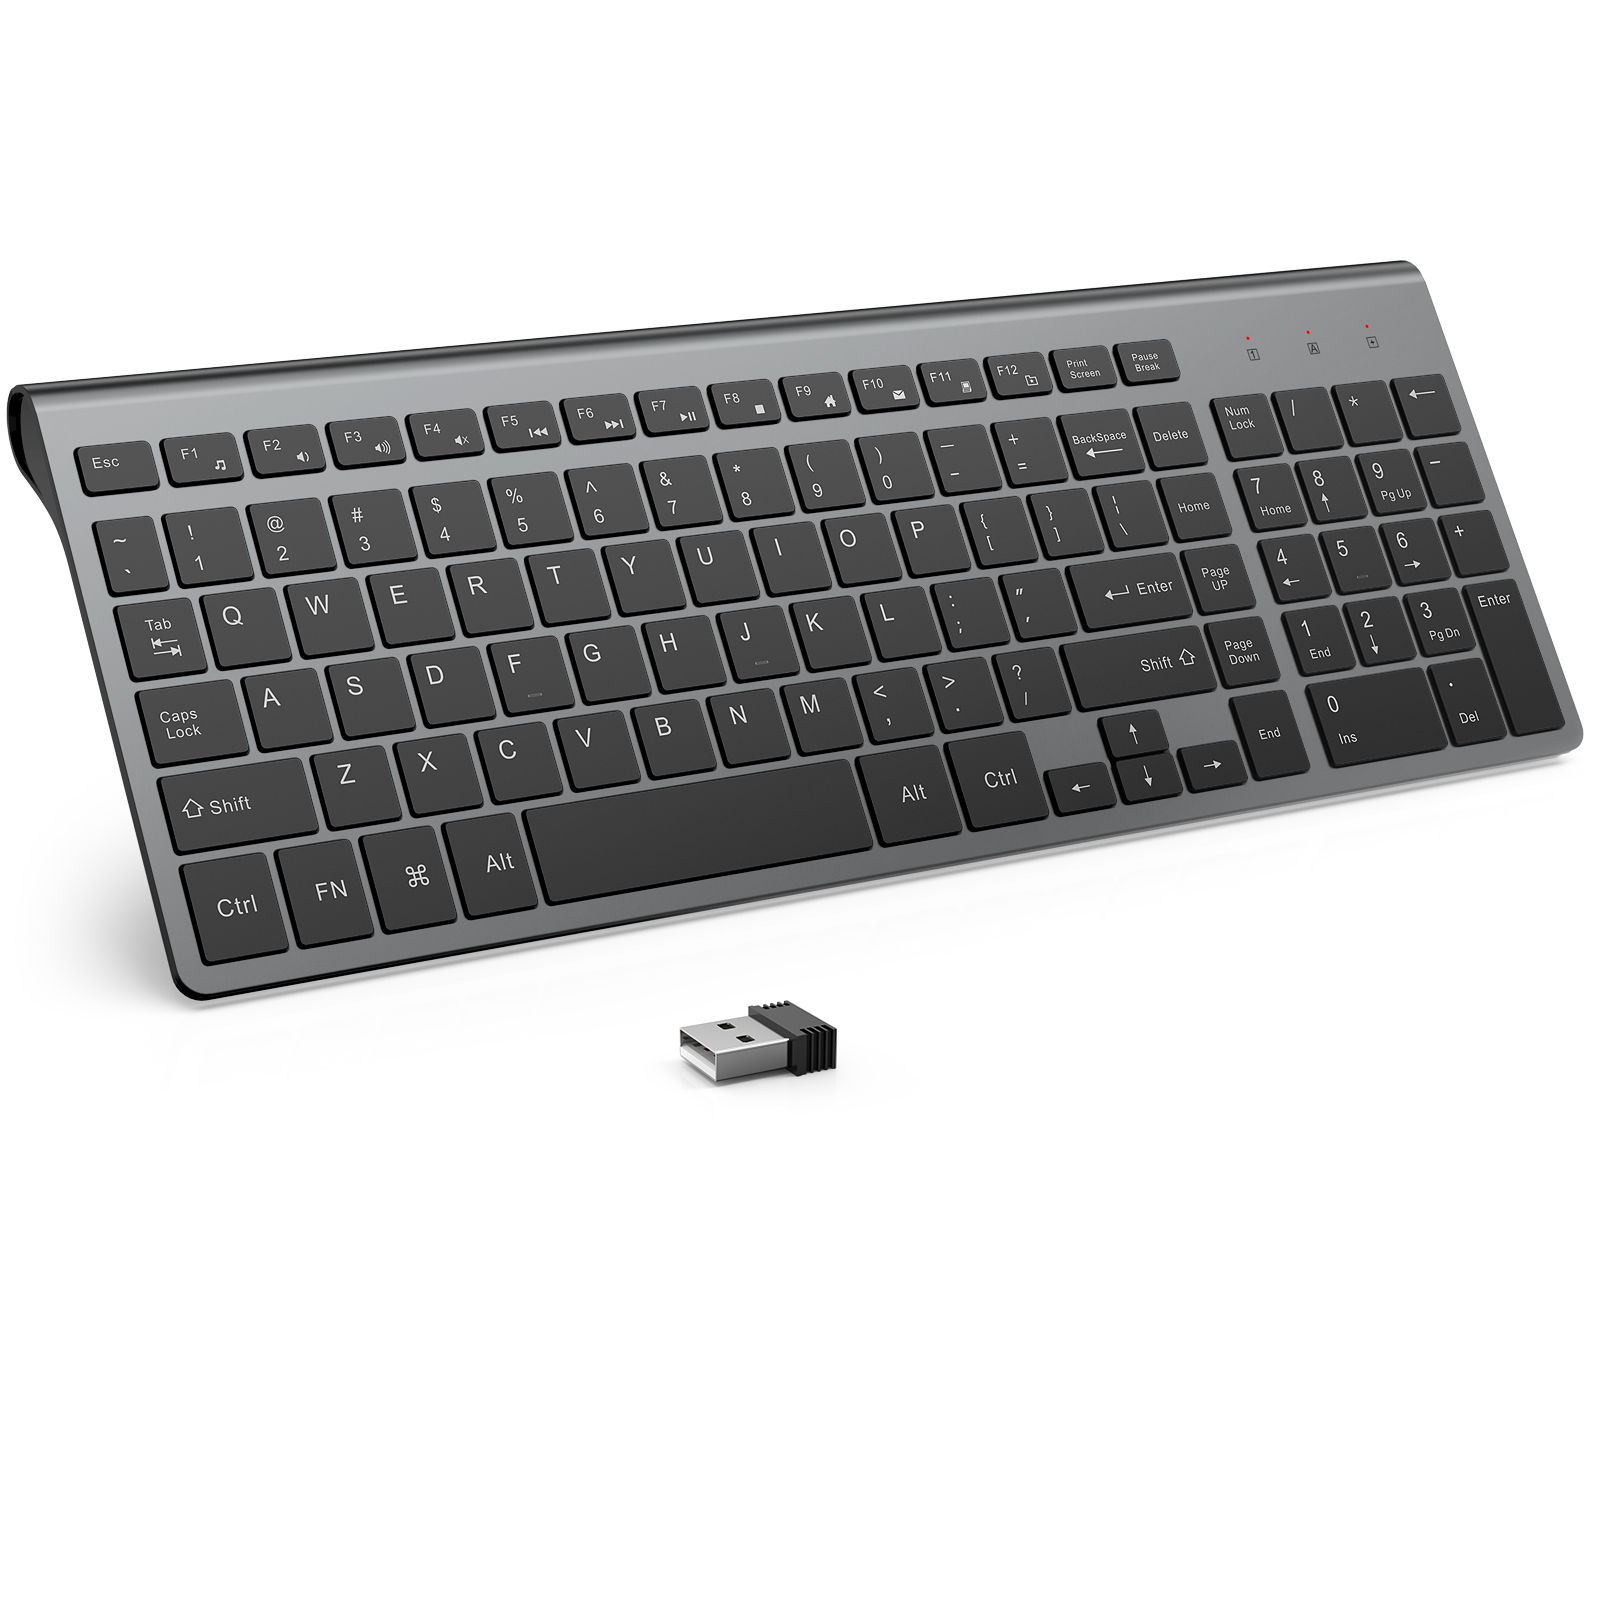 Wireless Keyboard, J JOYACCESS 2.4G Slim and Compact Wireless Keyboard with Numeric Pad for Laptop, MacBook Air, Apple, Computer, PC(Black and Grey)Rechargeable Wireless Keyboard and Mouse Combo- J JOYACCESS 2.4G Full Size Portable Keyboard and Mouse Ergonomic, Quiet Click Compact Design for Laptop,PC,Desktop,Computer,Windows- Black
